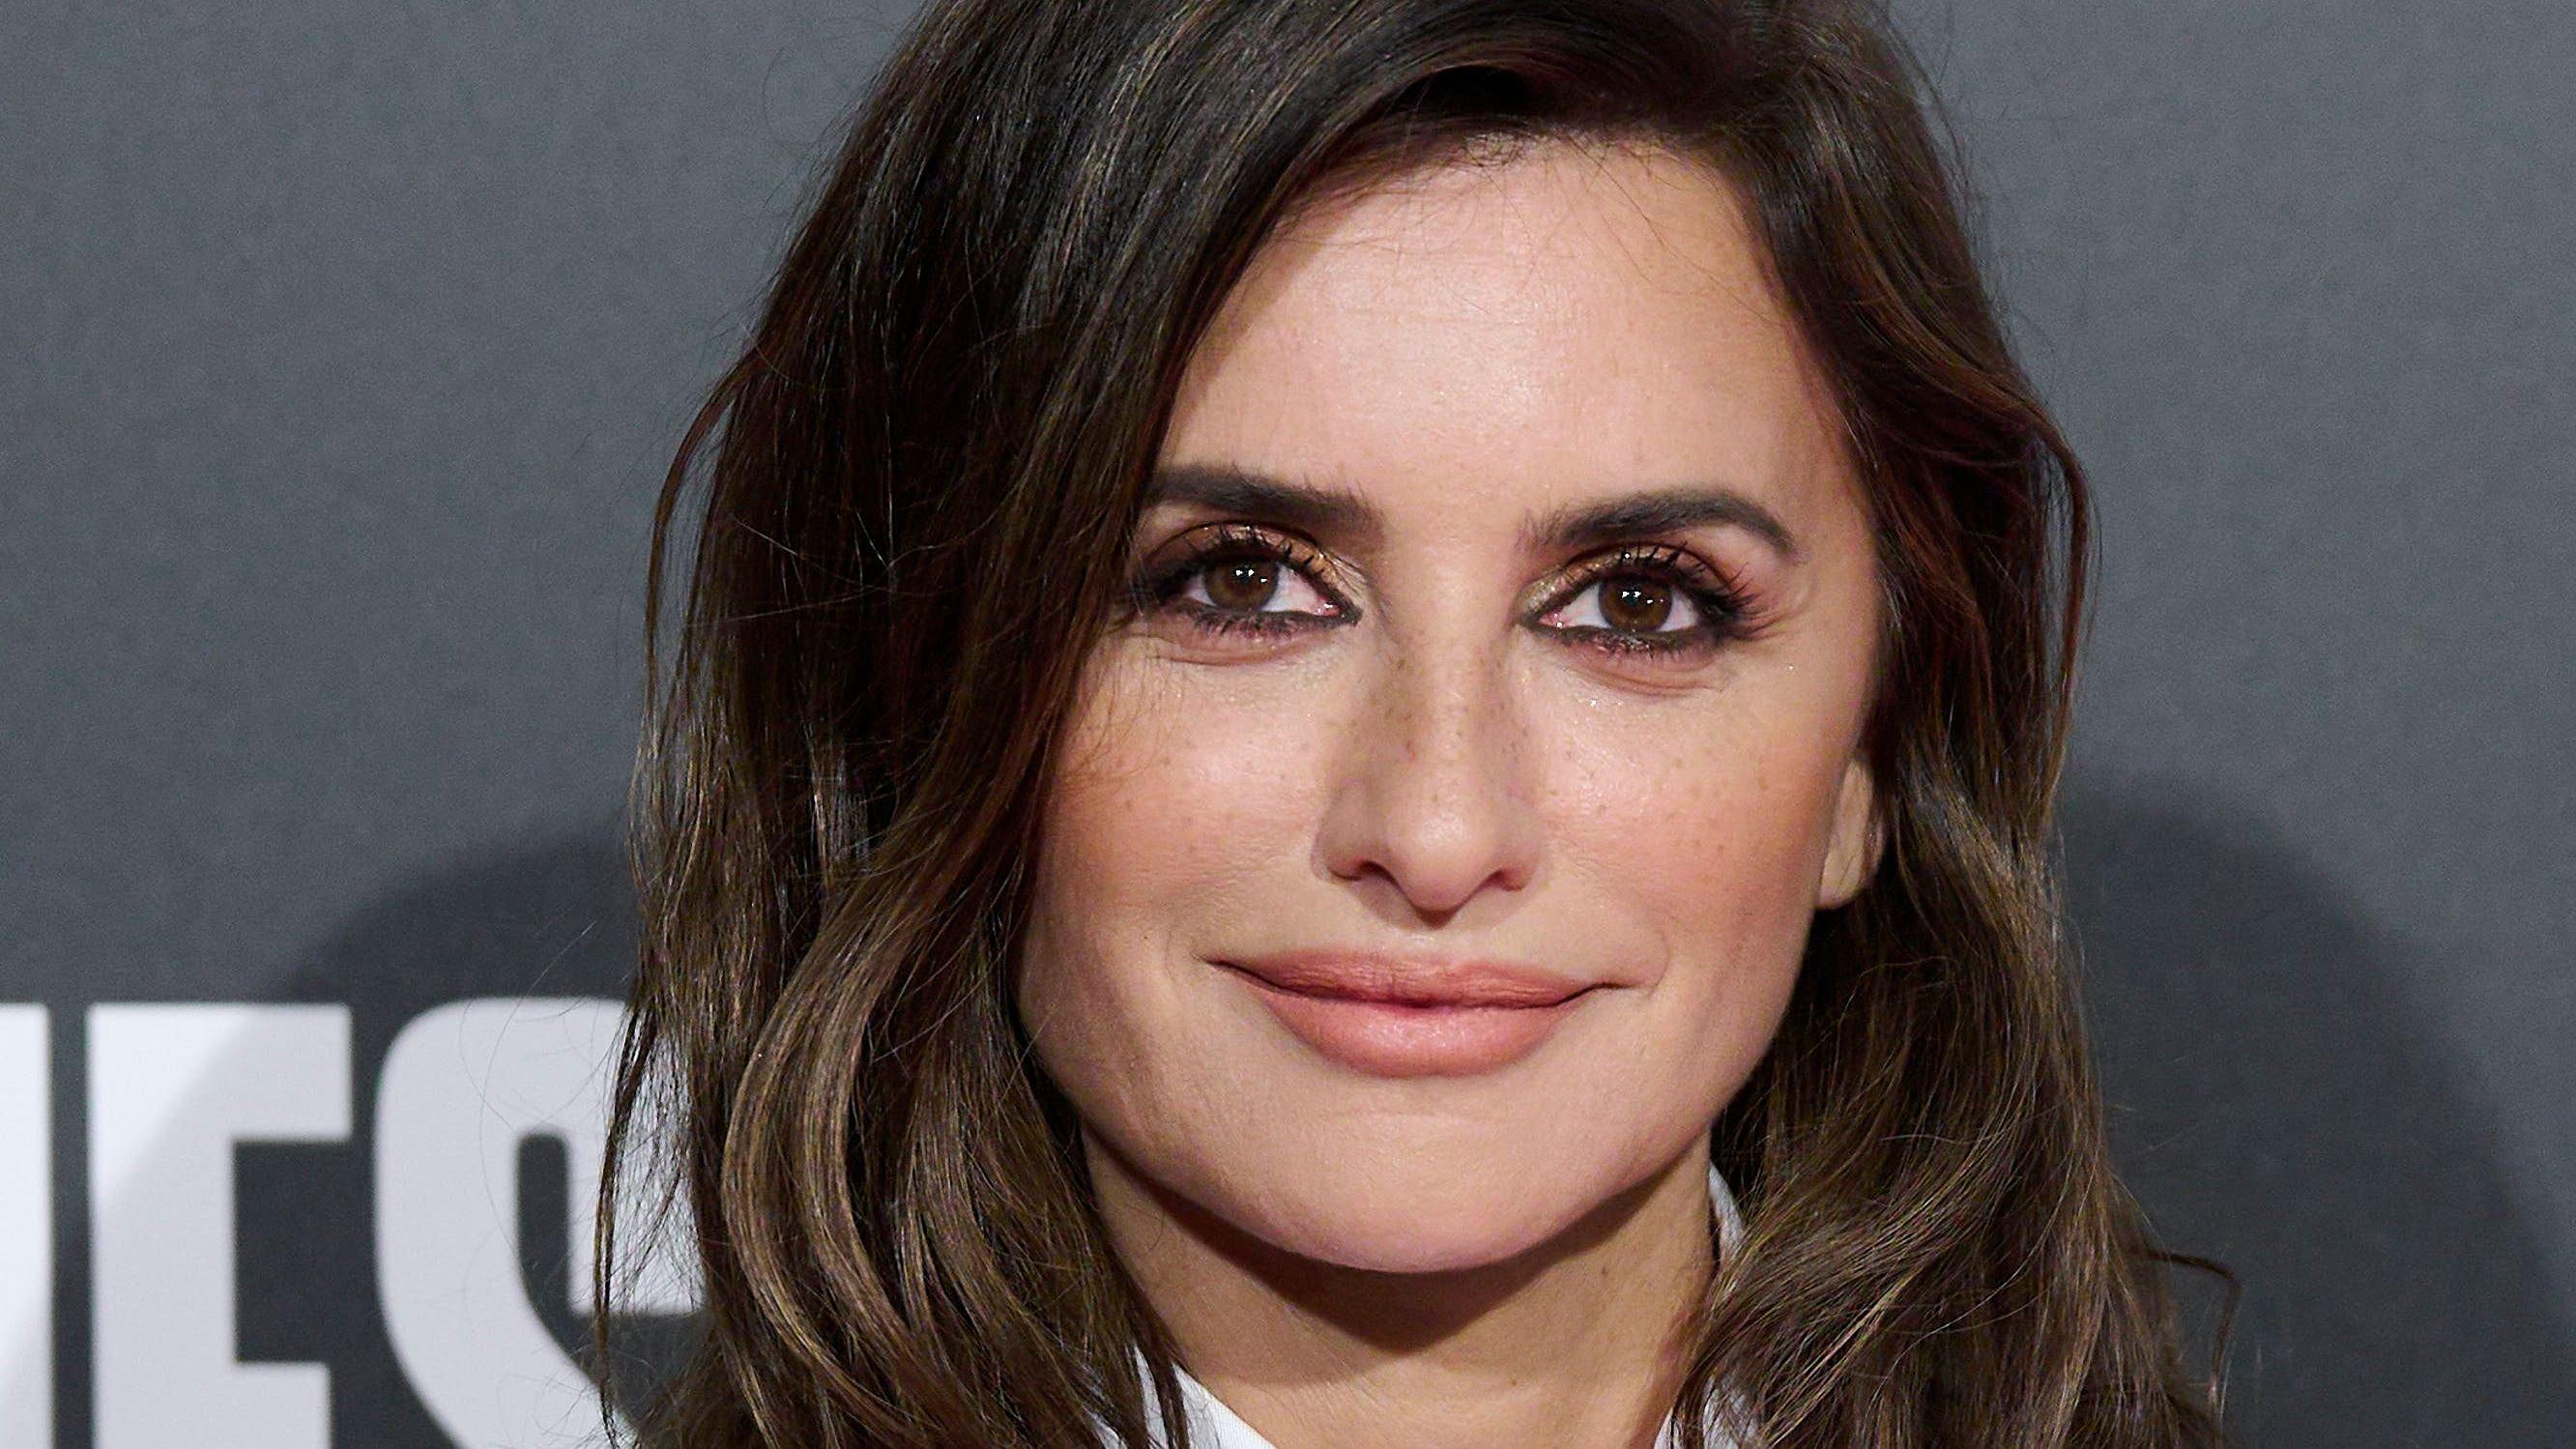 Penelope Cruz rocks wavy locks with a side-sweep at an event.